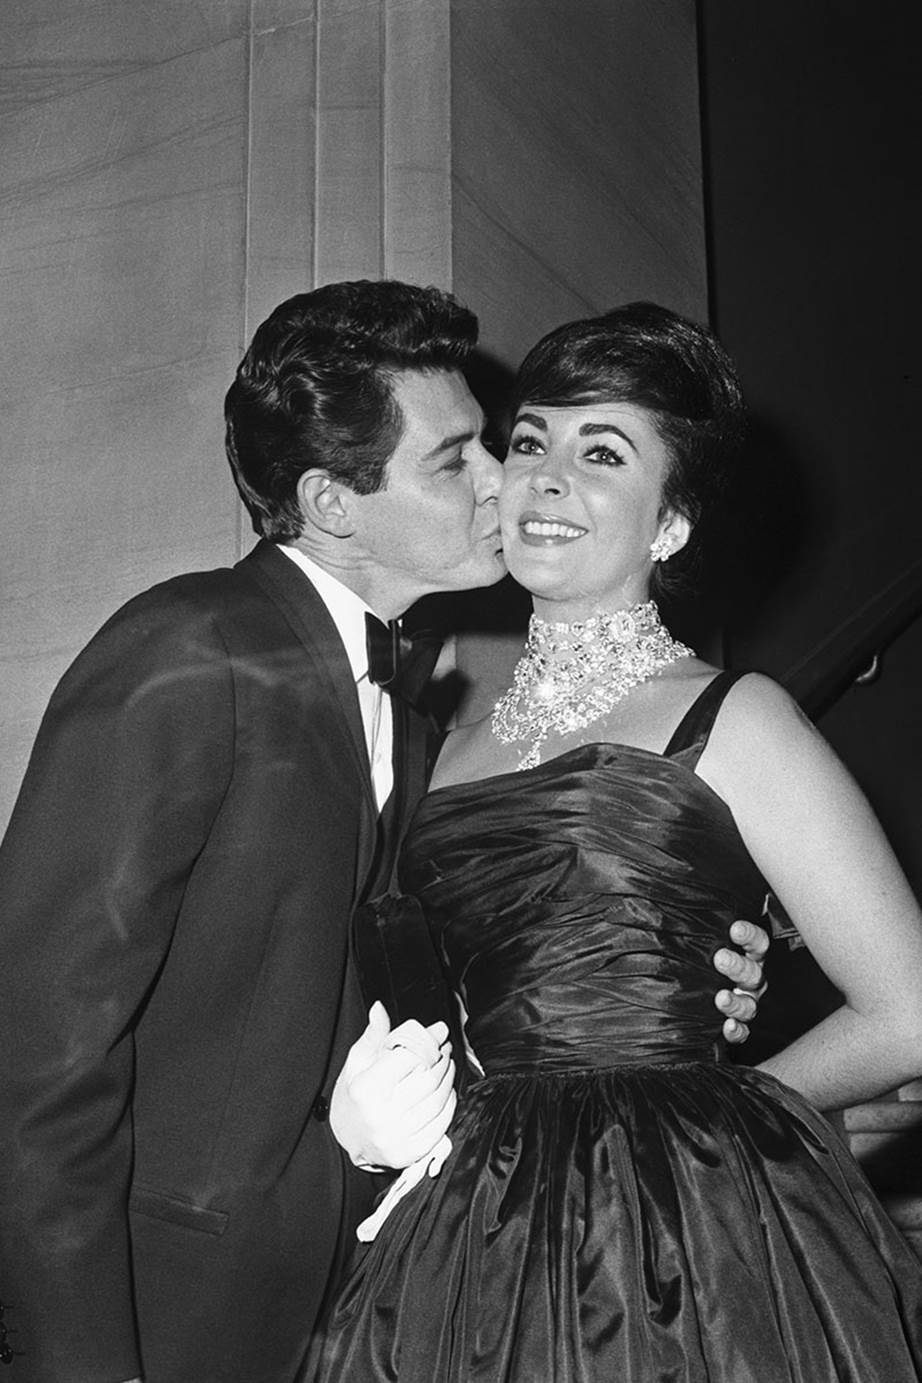 Elizabth Taylor and Eddie Fisher, whose celebrity affair was a major scandal in the 1950s